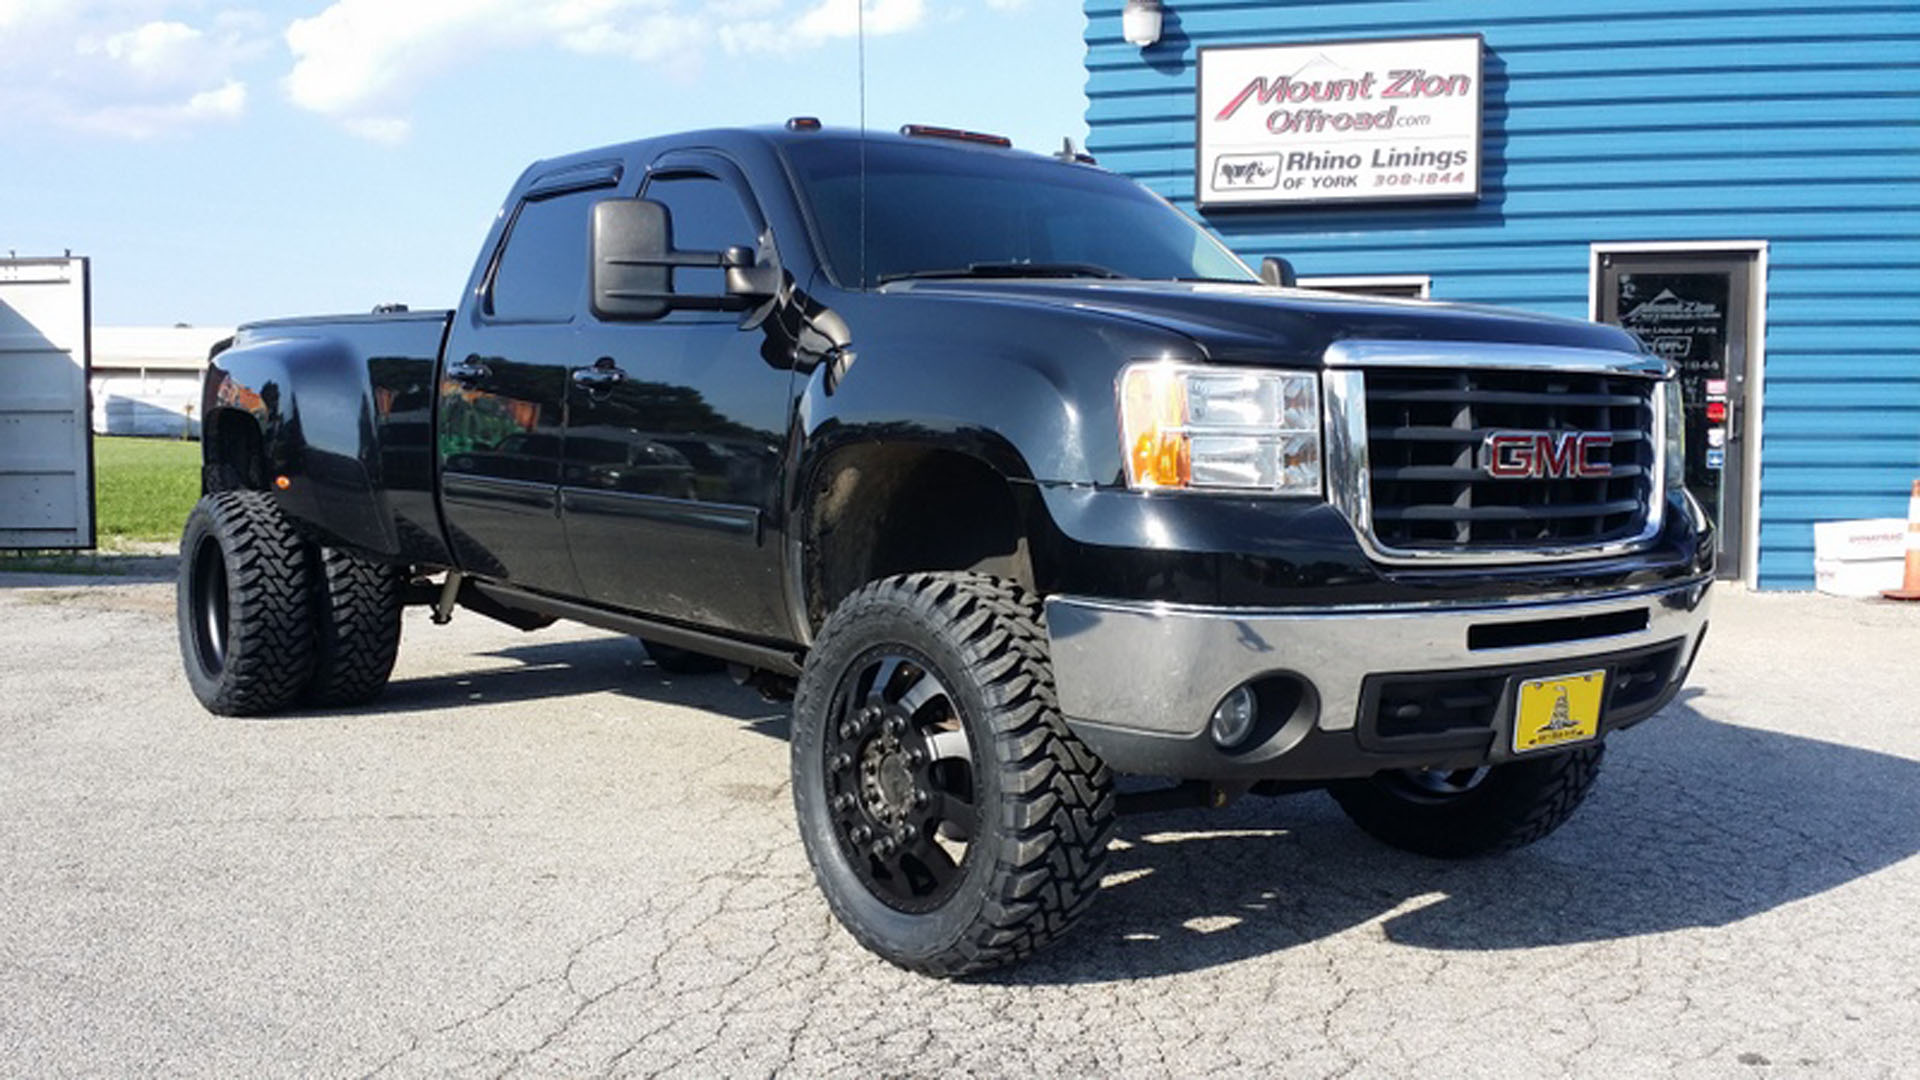 2009 GMC 3500 Dually - Mount Zion Offroad.